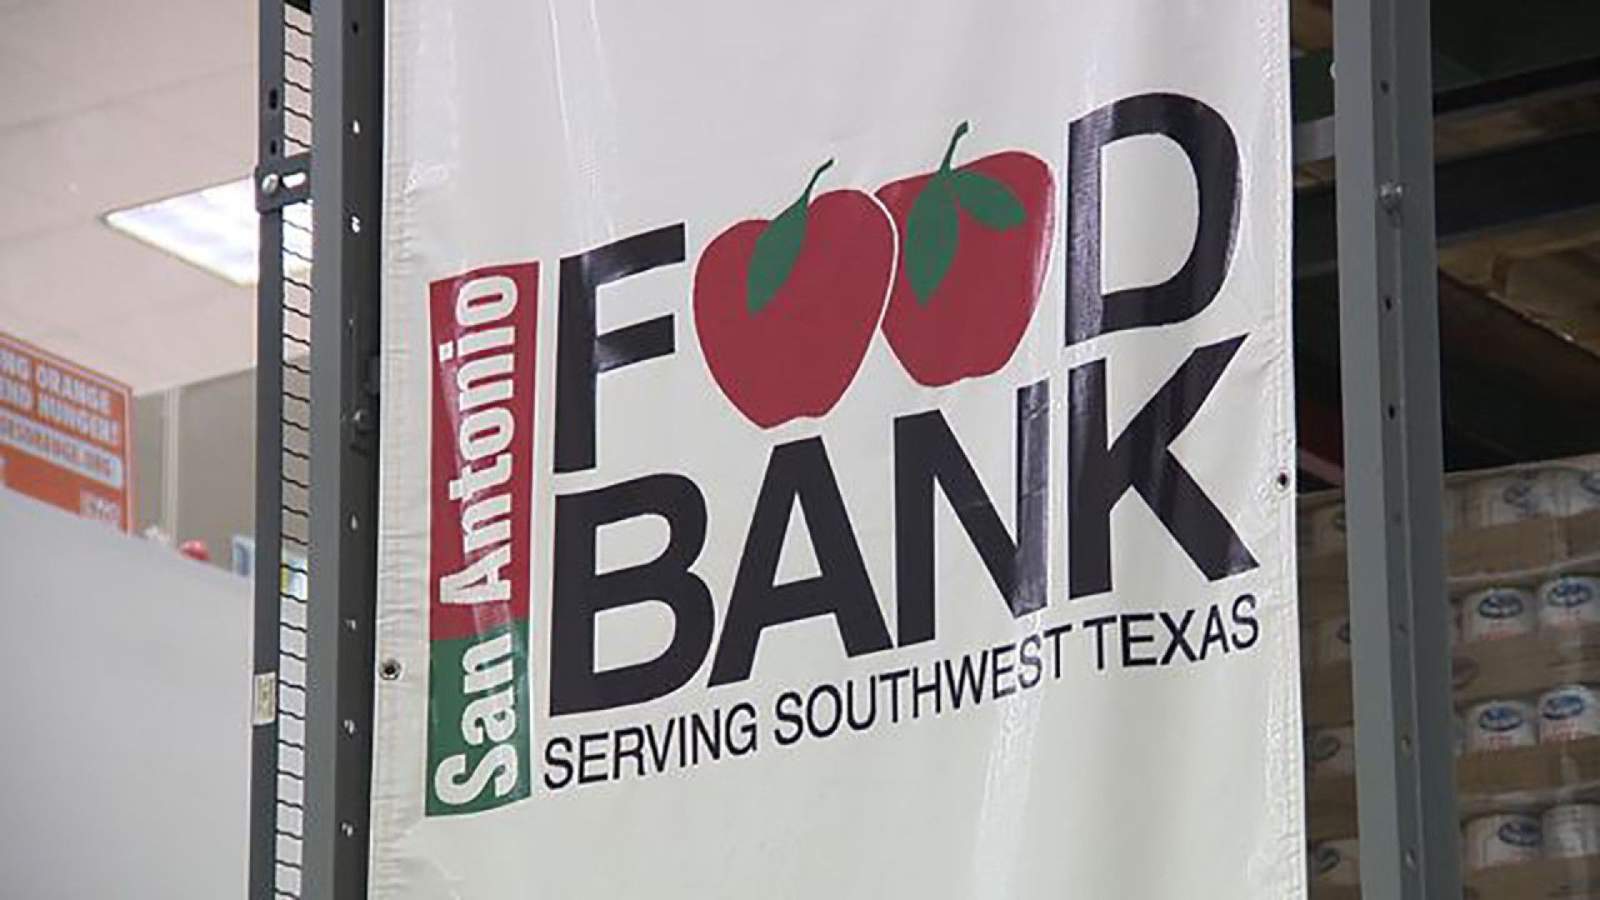 The Food Bank of San Antonio needs more than 500 volunteers to help in 7 mega mobile food distribution locations this weekend